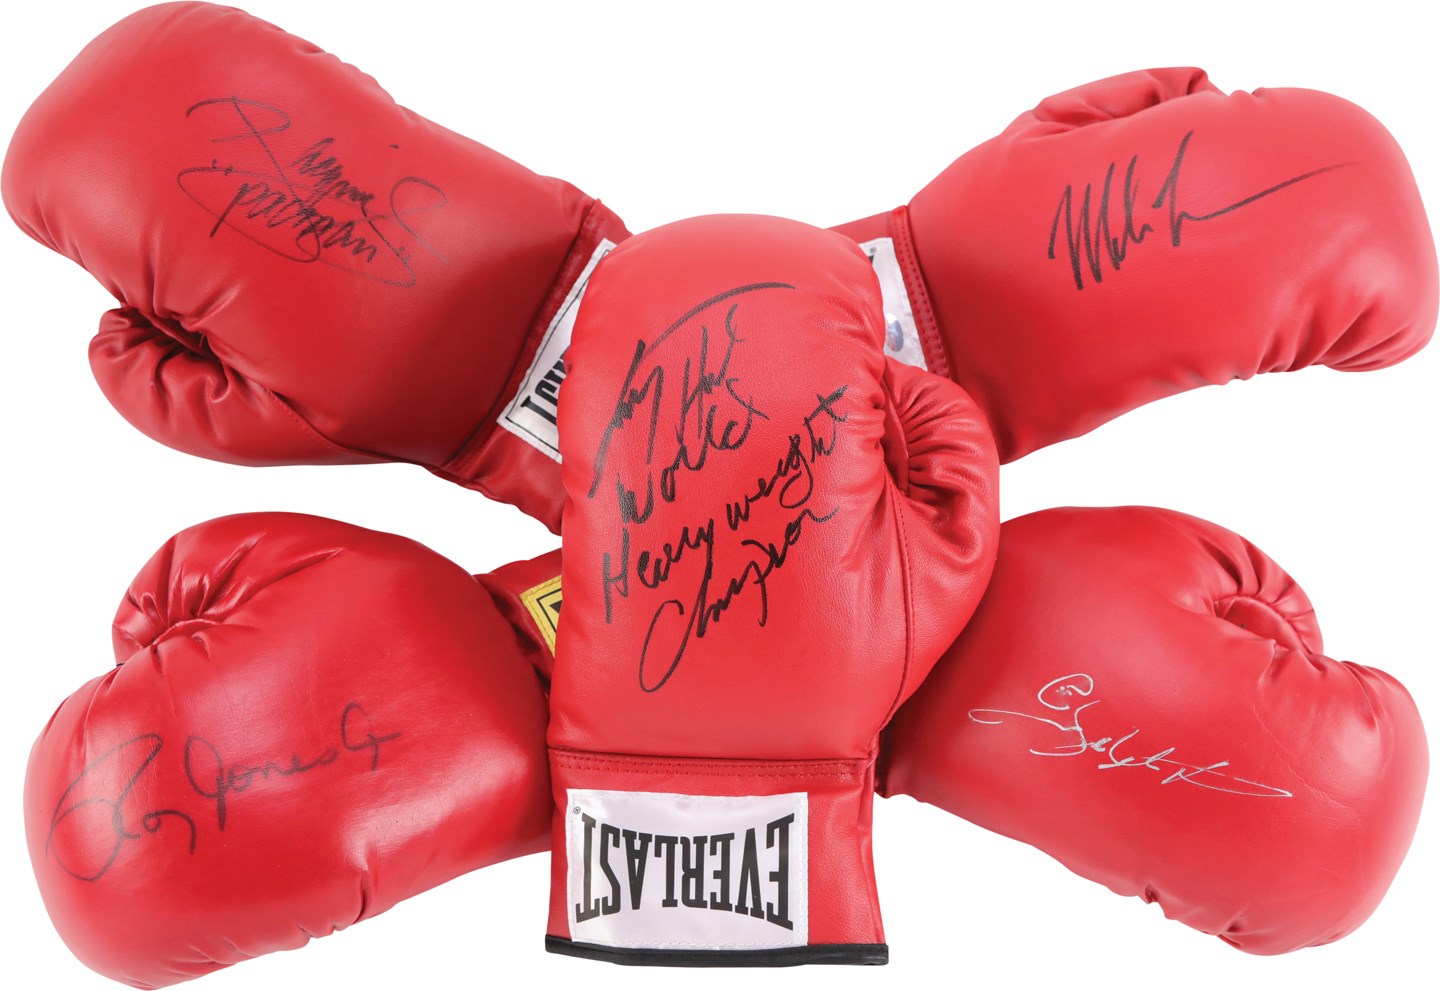 Muhammad Ali & Boxing - Boxing Legends Signed Glove Collection (30)